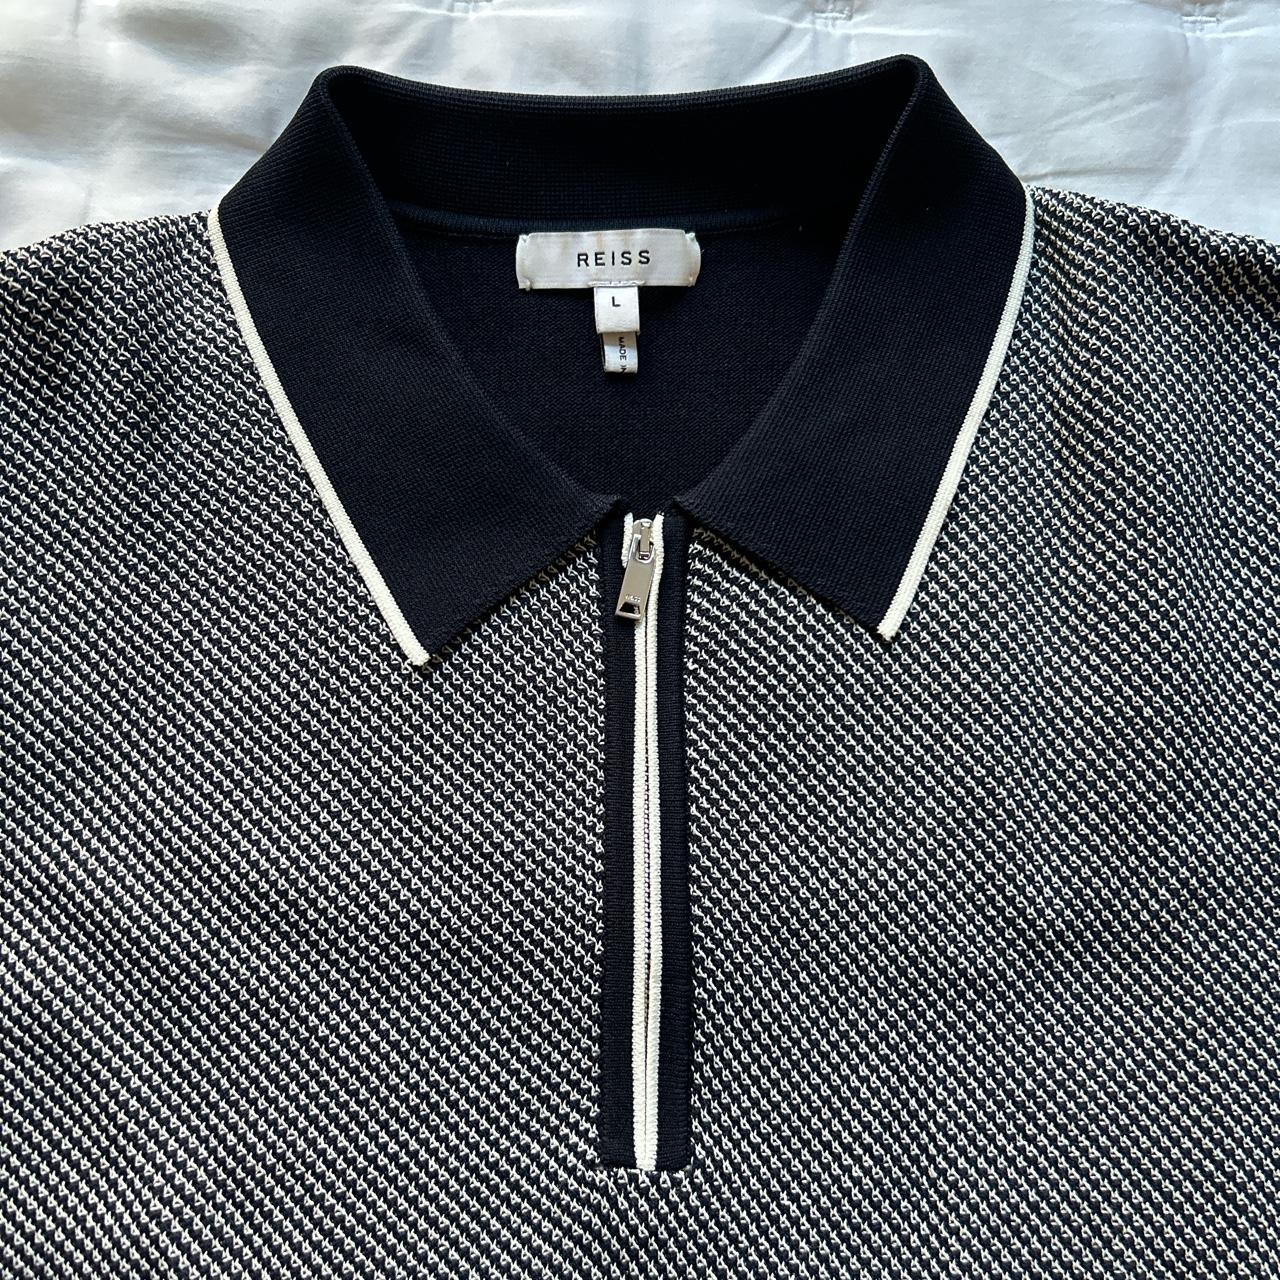 REISS ZIP POLO Believe it or not, this thing was... - Depop